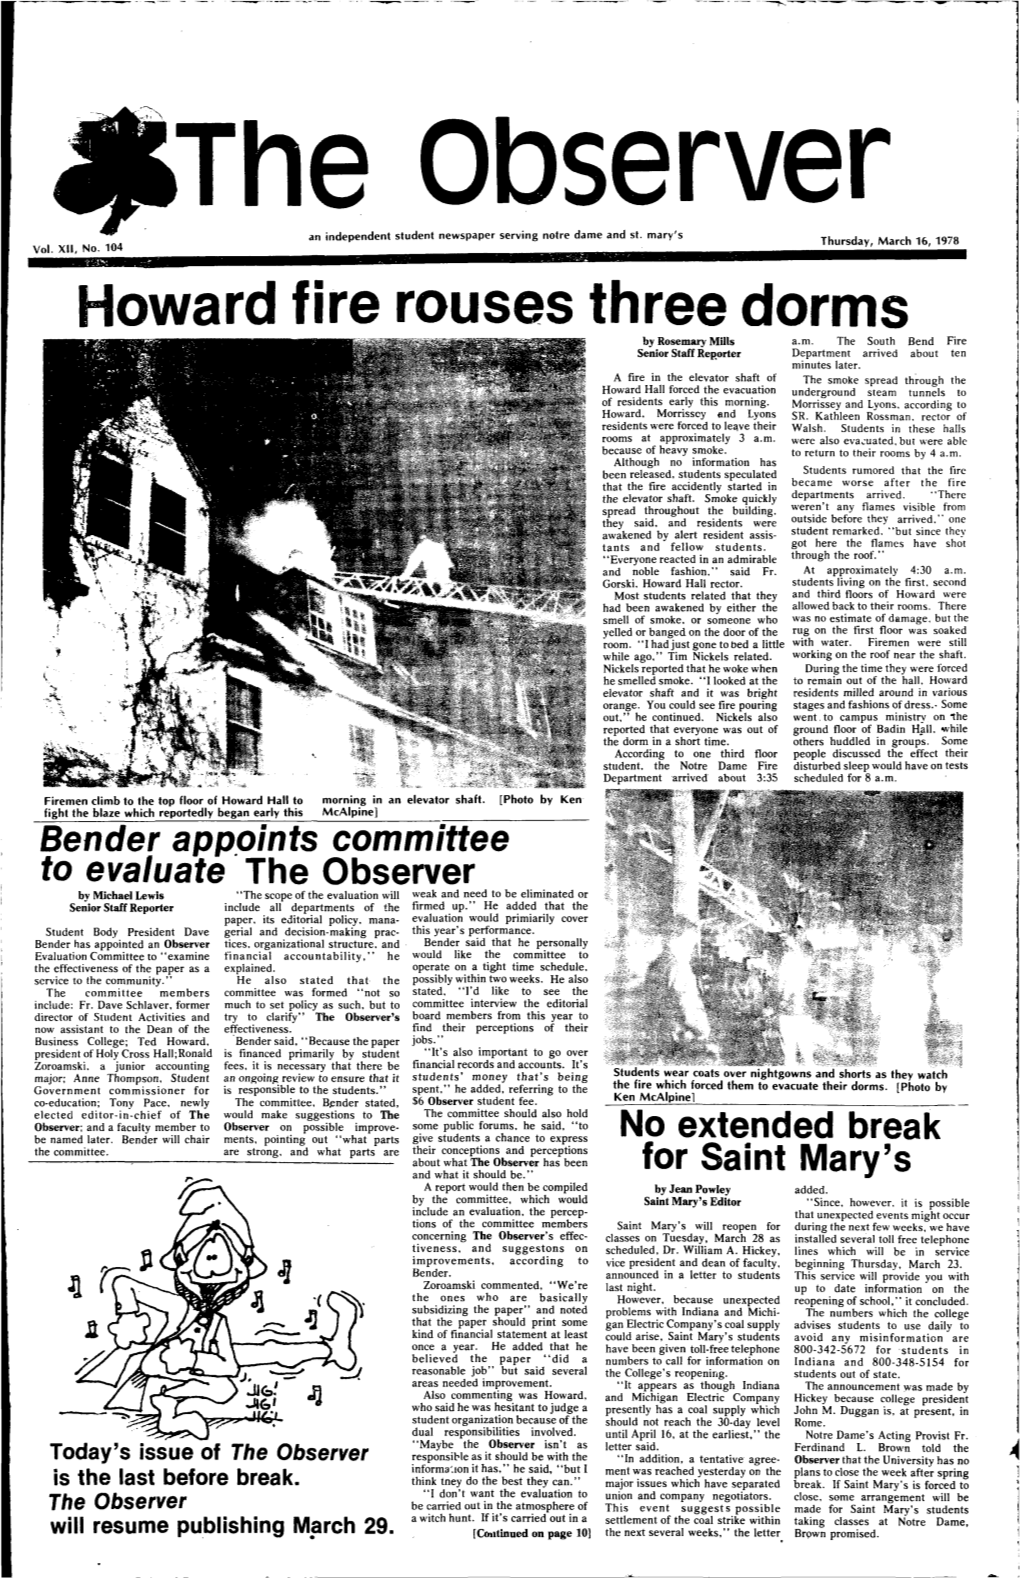 Howard Fire Rouses Three Dorms by Rosemary Mills A.M